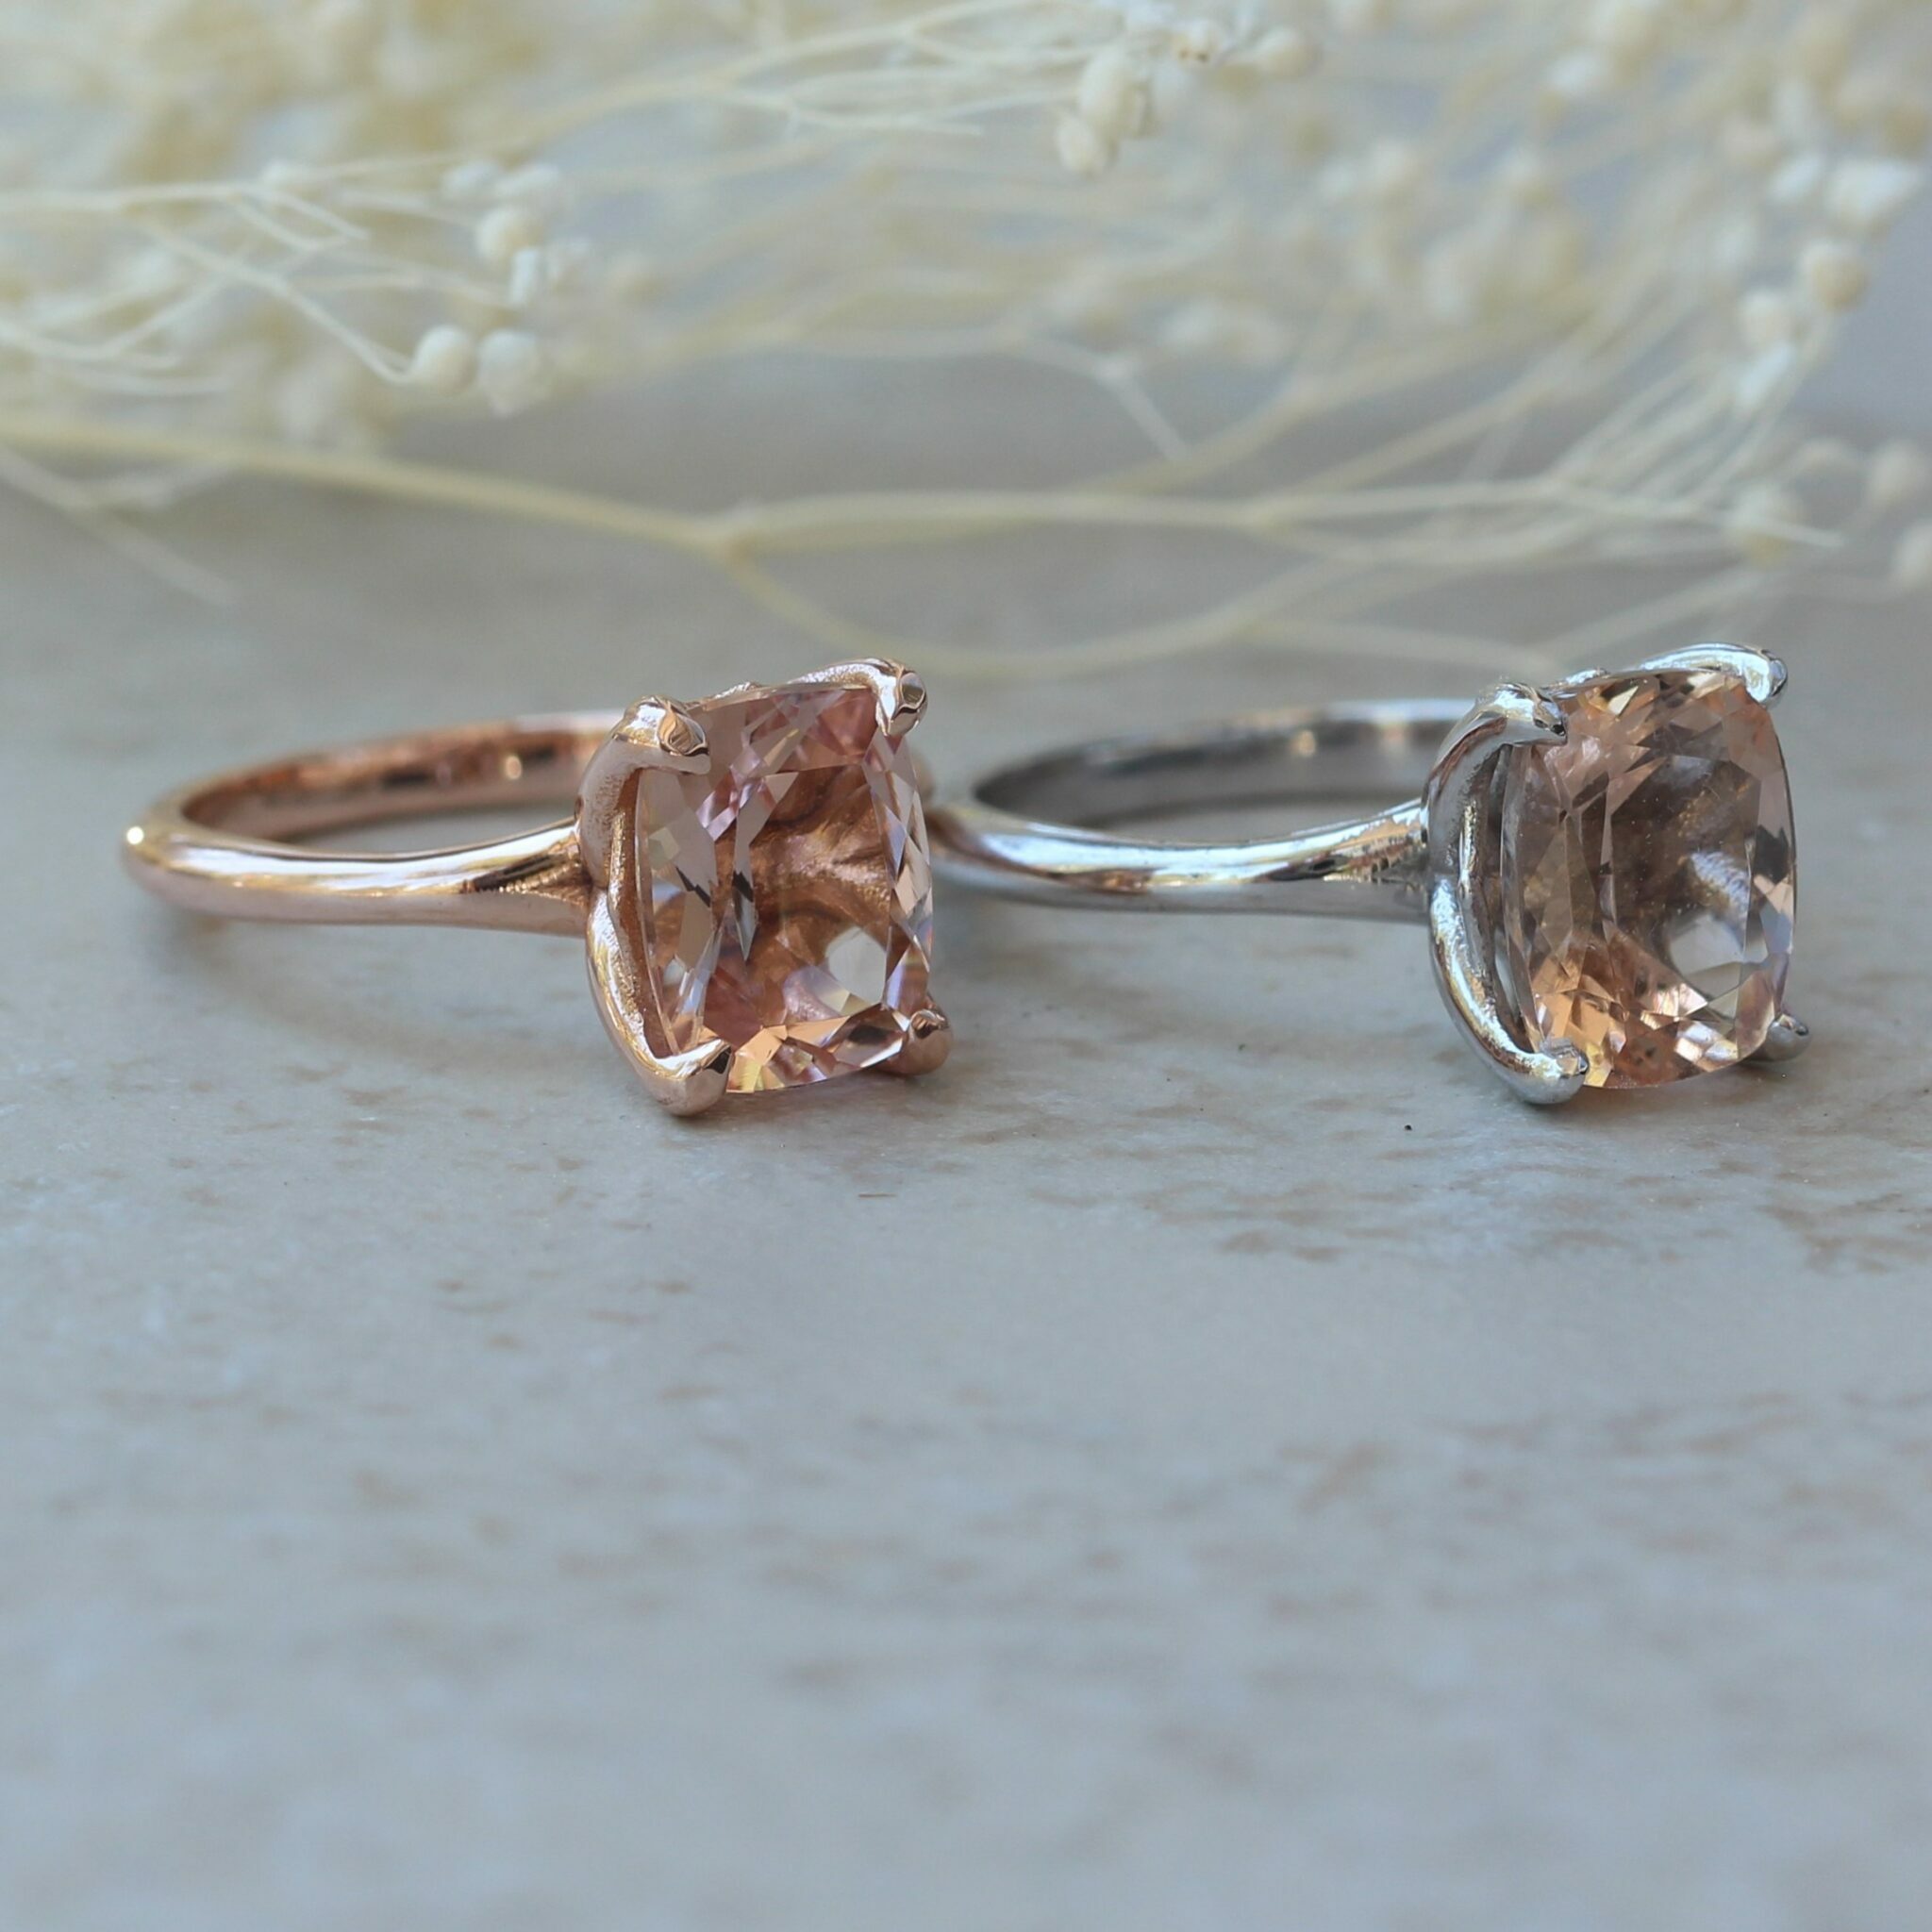 How-does-Morganite-look-in-rose-gold-versus-white-gold-LS5864-3